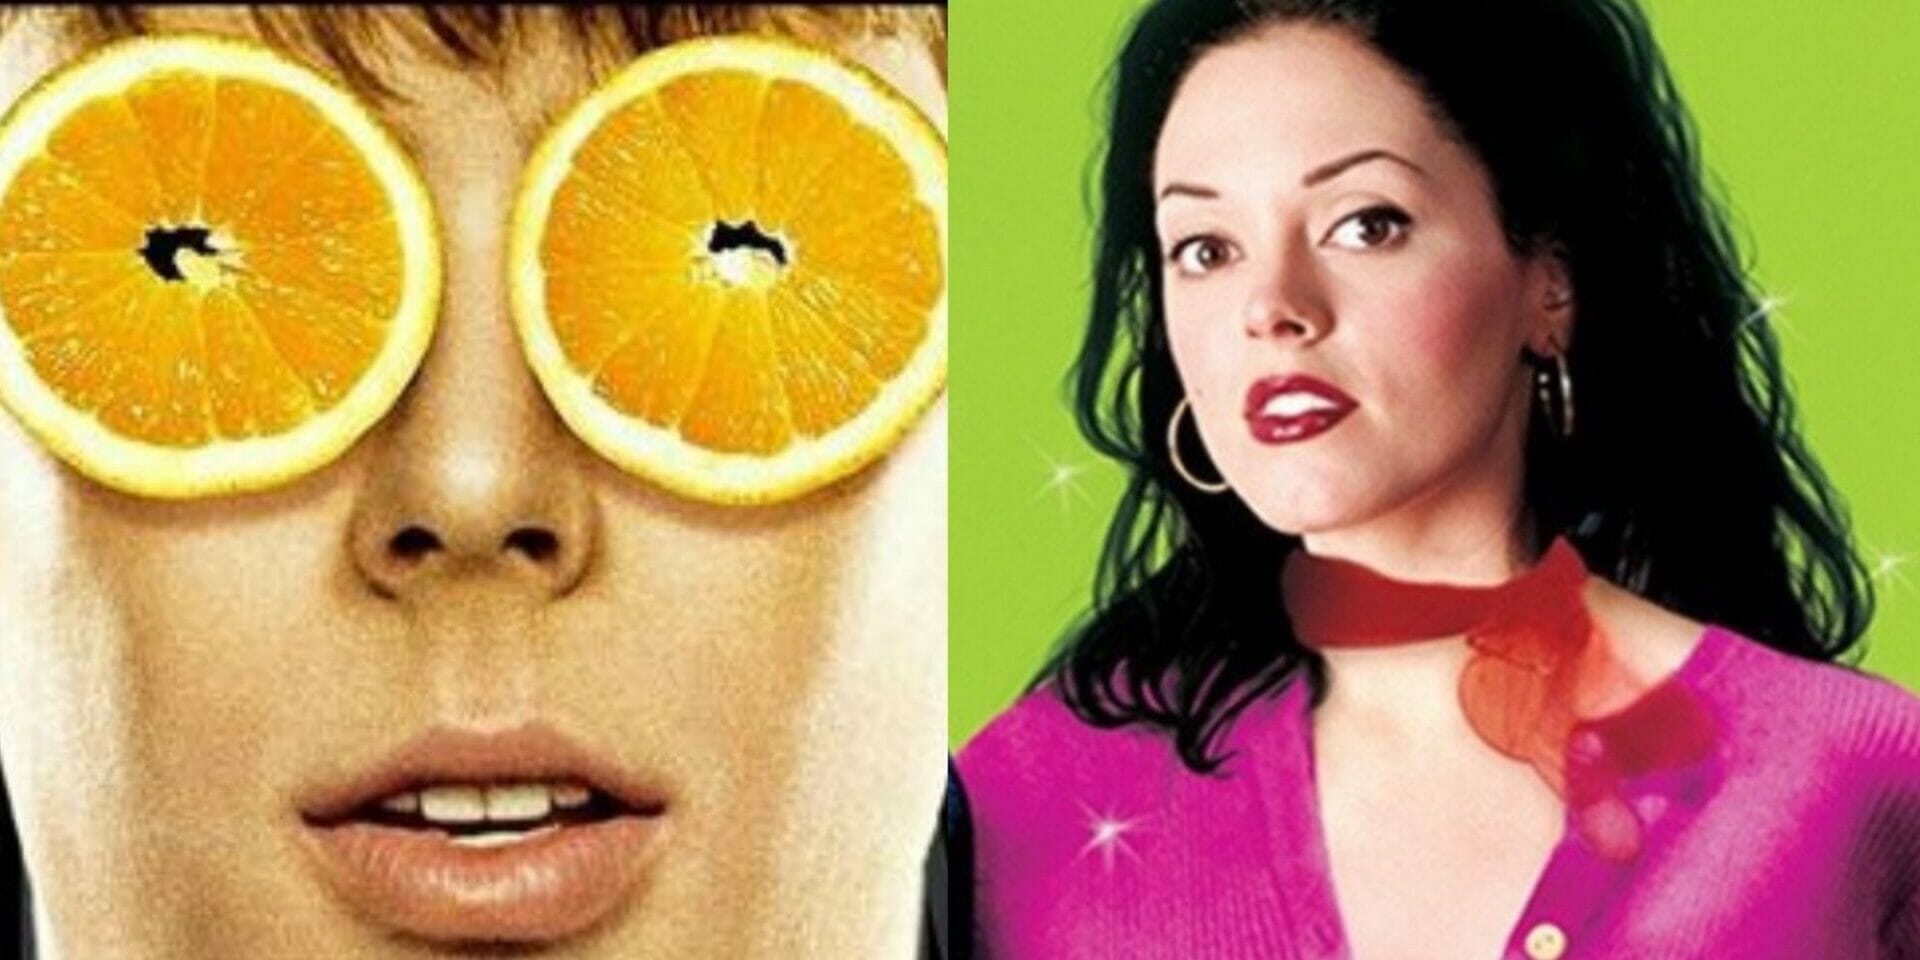 10 Funny Teen Movies Perfect For A Movie Marathon, According To Reddit